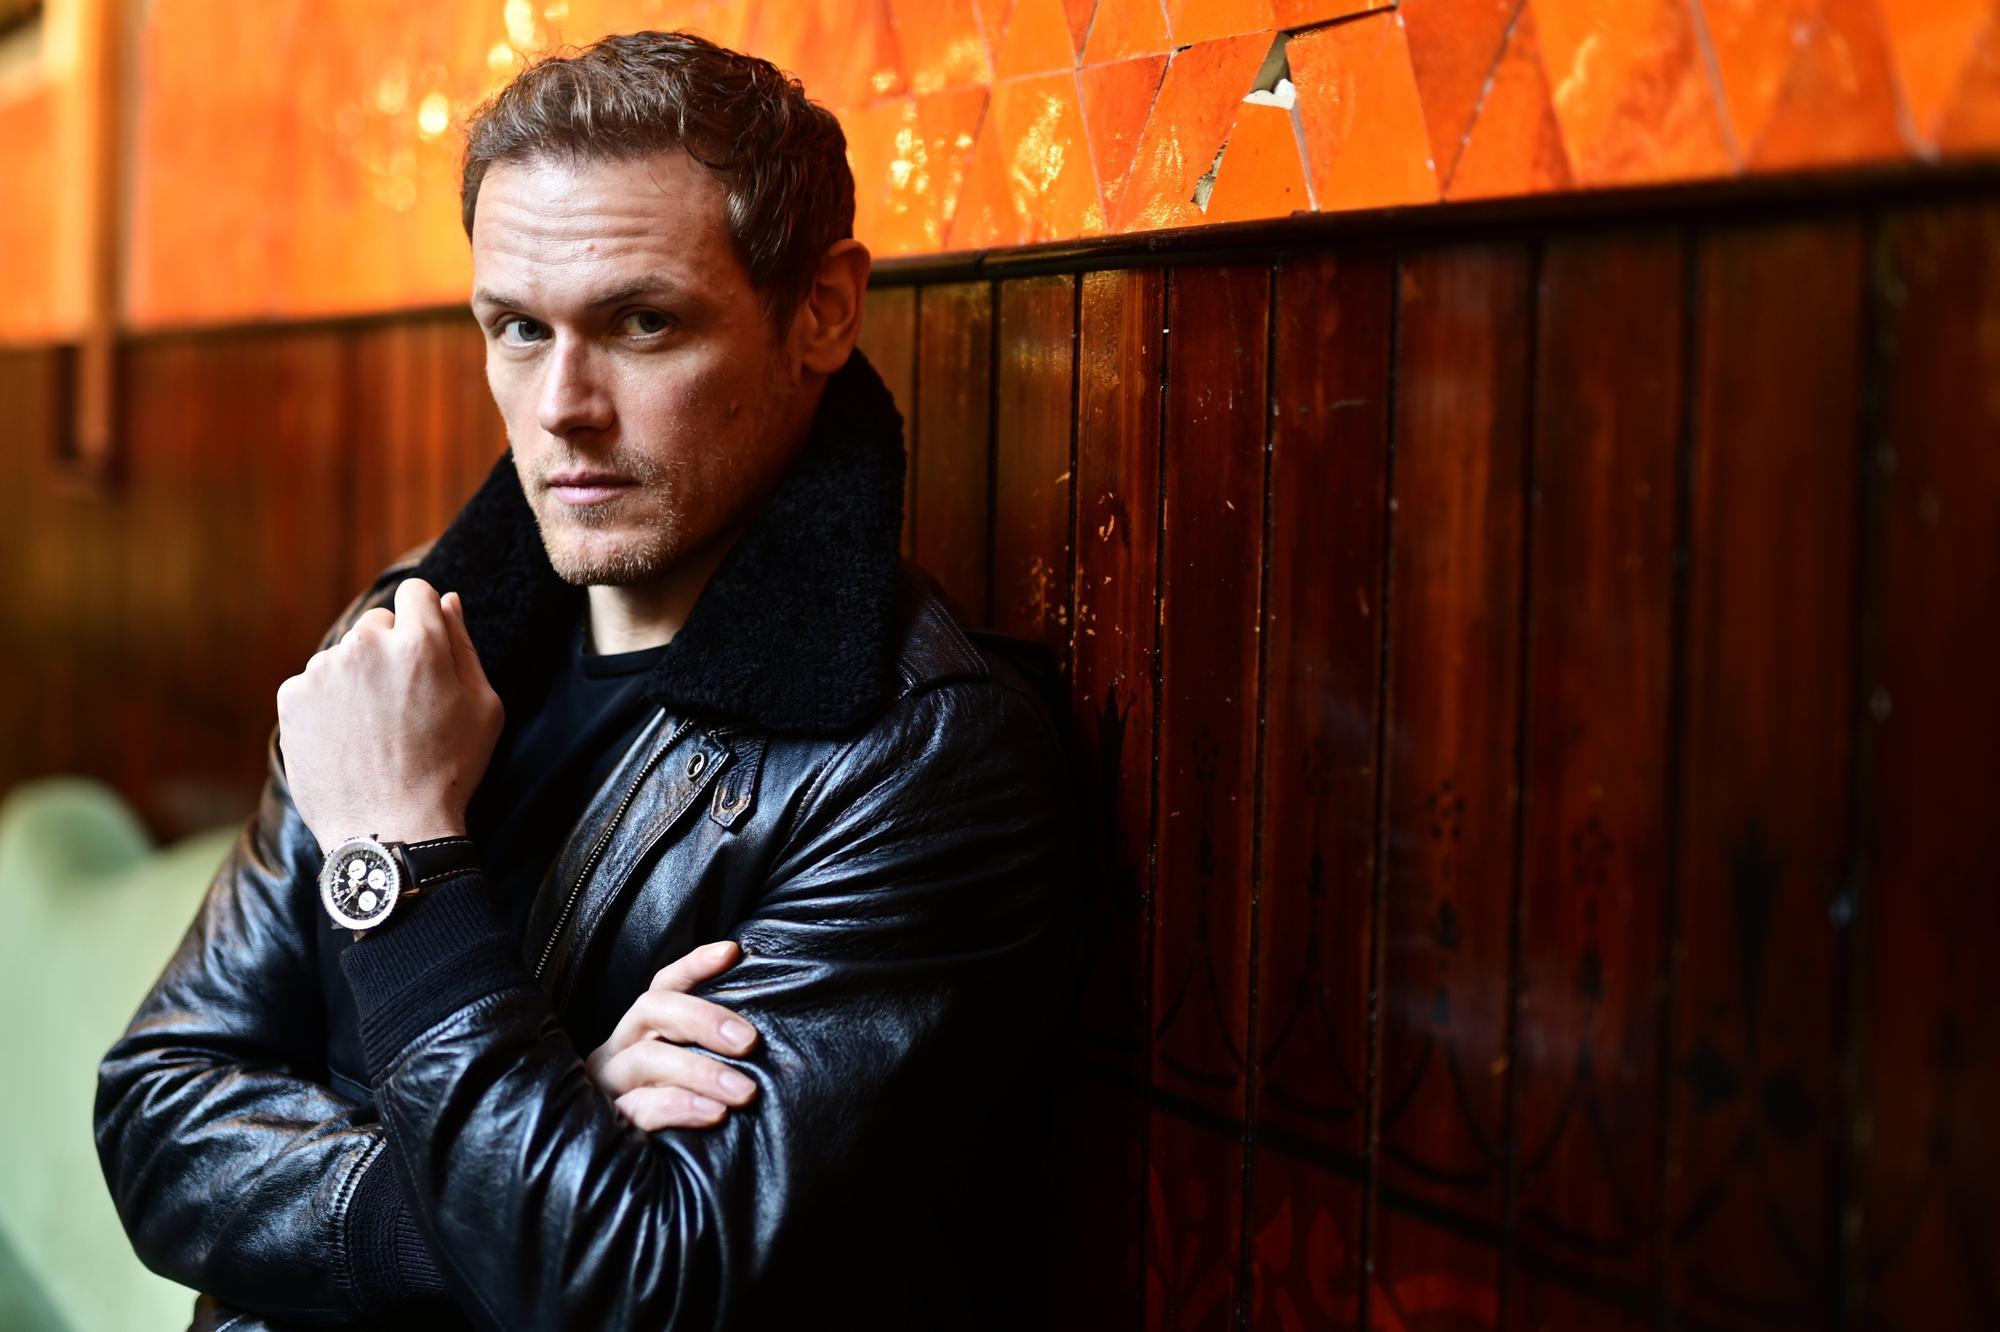 Outlander star Sam Heughan launches ‘call to action’ to young Scots on climate emergency for Edinburgh Festival Fringe